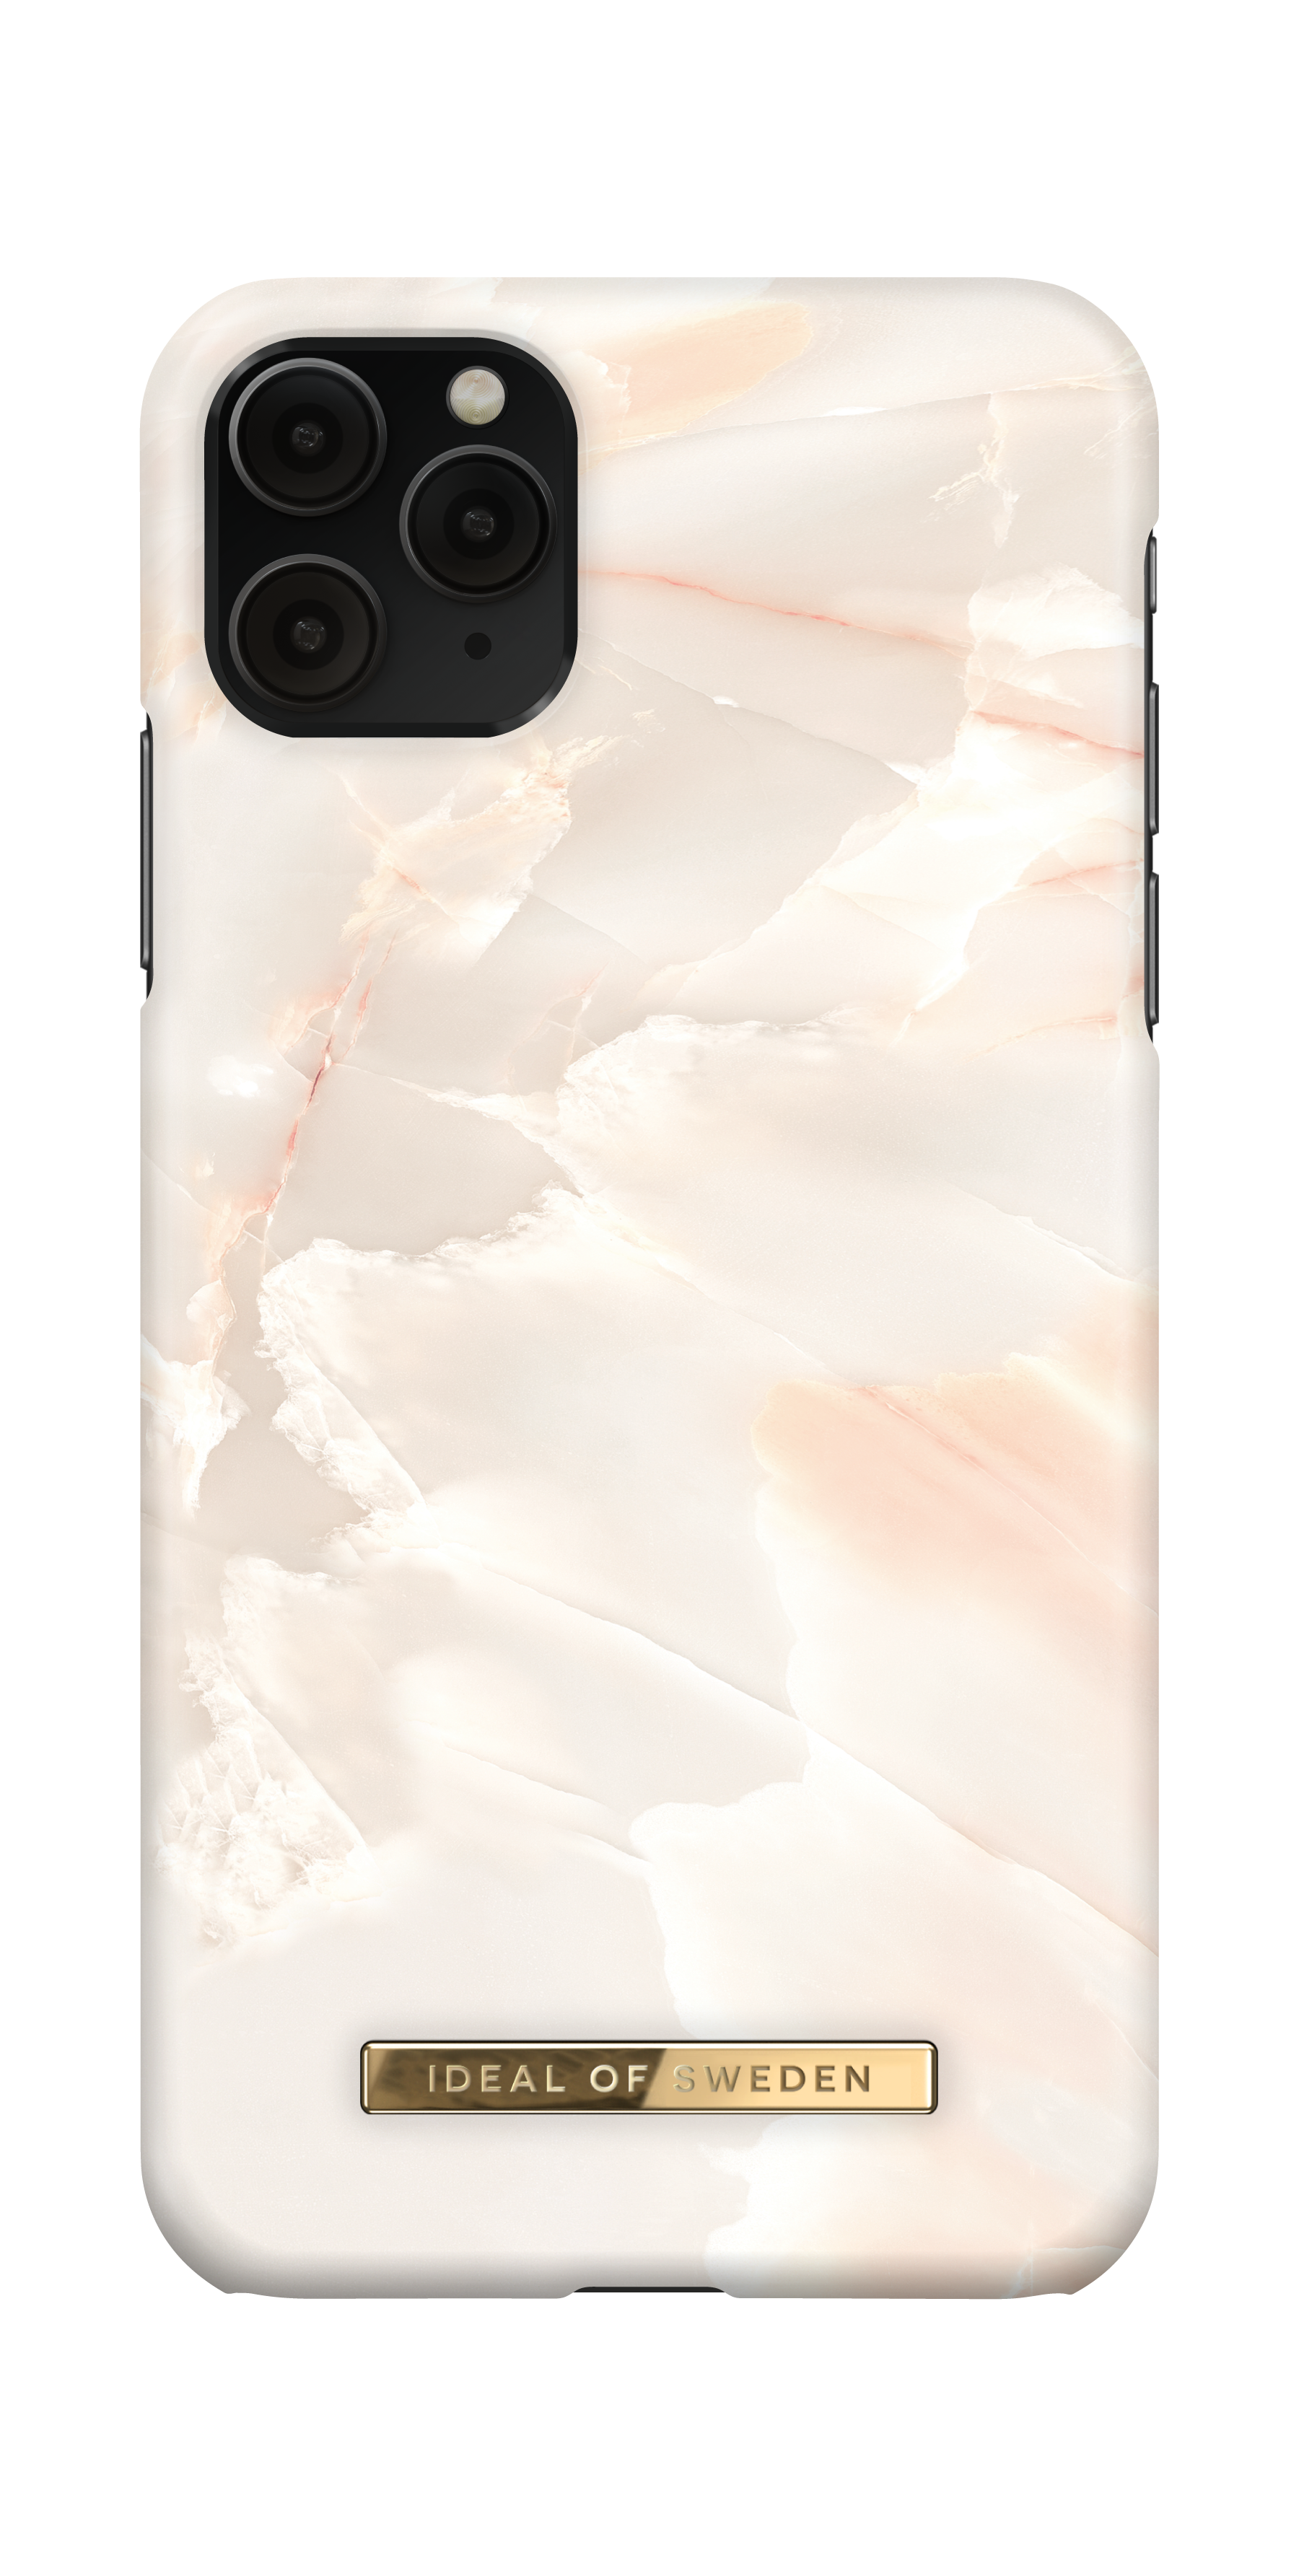 IDEAL Backcover, Marble 11 XS SWEDEN Pro Max, IDFCSS21-I1965-257, iPhone Max, OF Pearl iPhone Rose Apple,